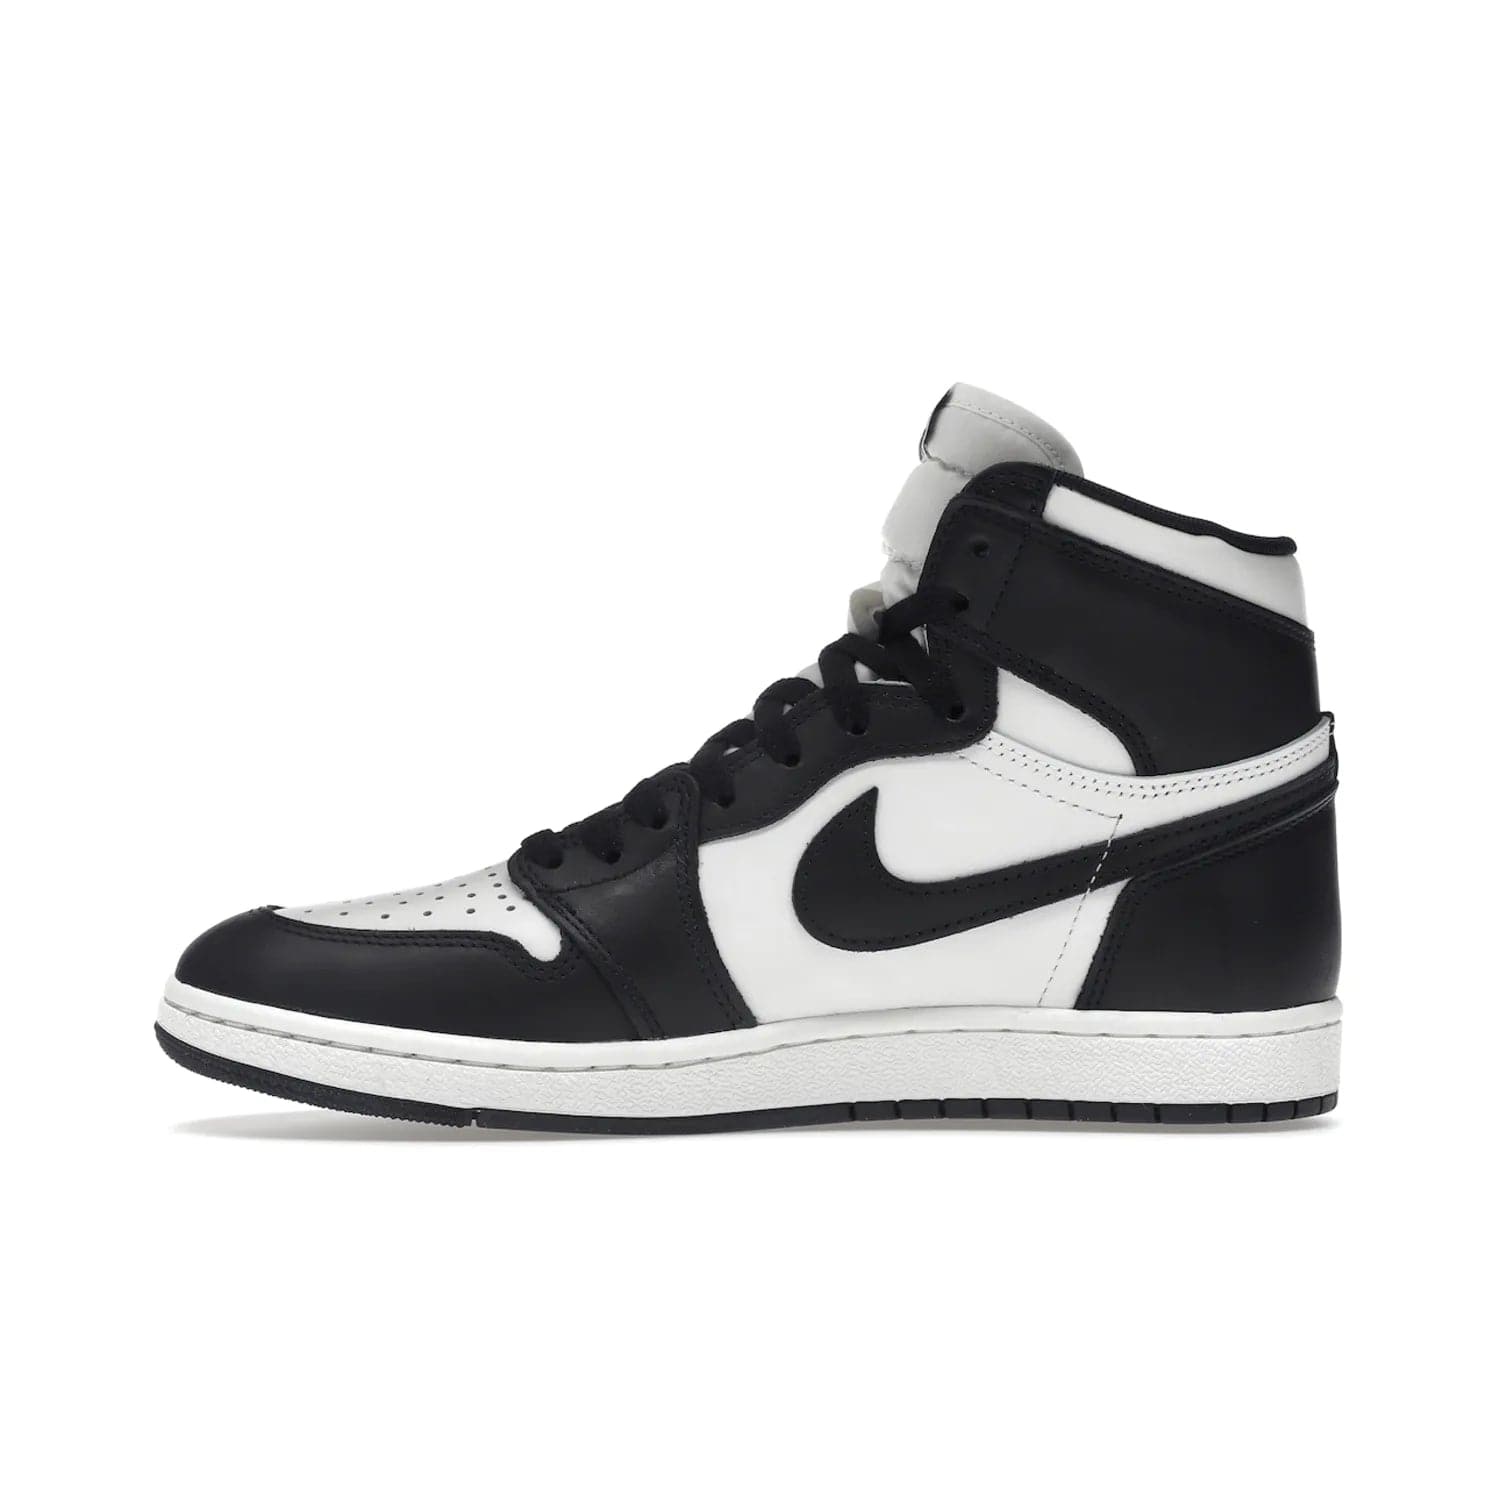 Jordan 1 Retro High 85 Black White (2023) - Image 19 - Only at www.BallersClubKickz.com - Brand new Jordan 1 Retro High 85 Black White (2023) now available. A classic color scheme of black and white leather uppers with signature Nike Air logo on the tongue. Must-have for any Air Jordan fan. Available February 15, 2023.